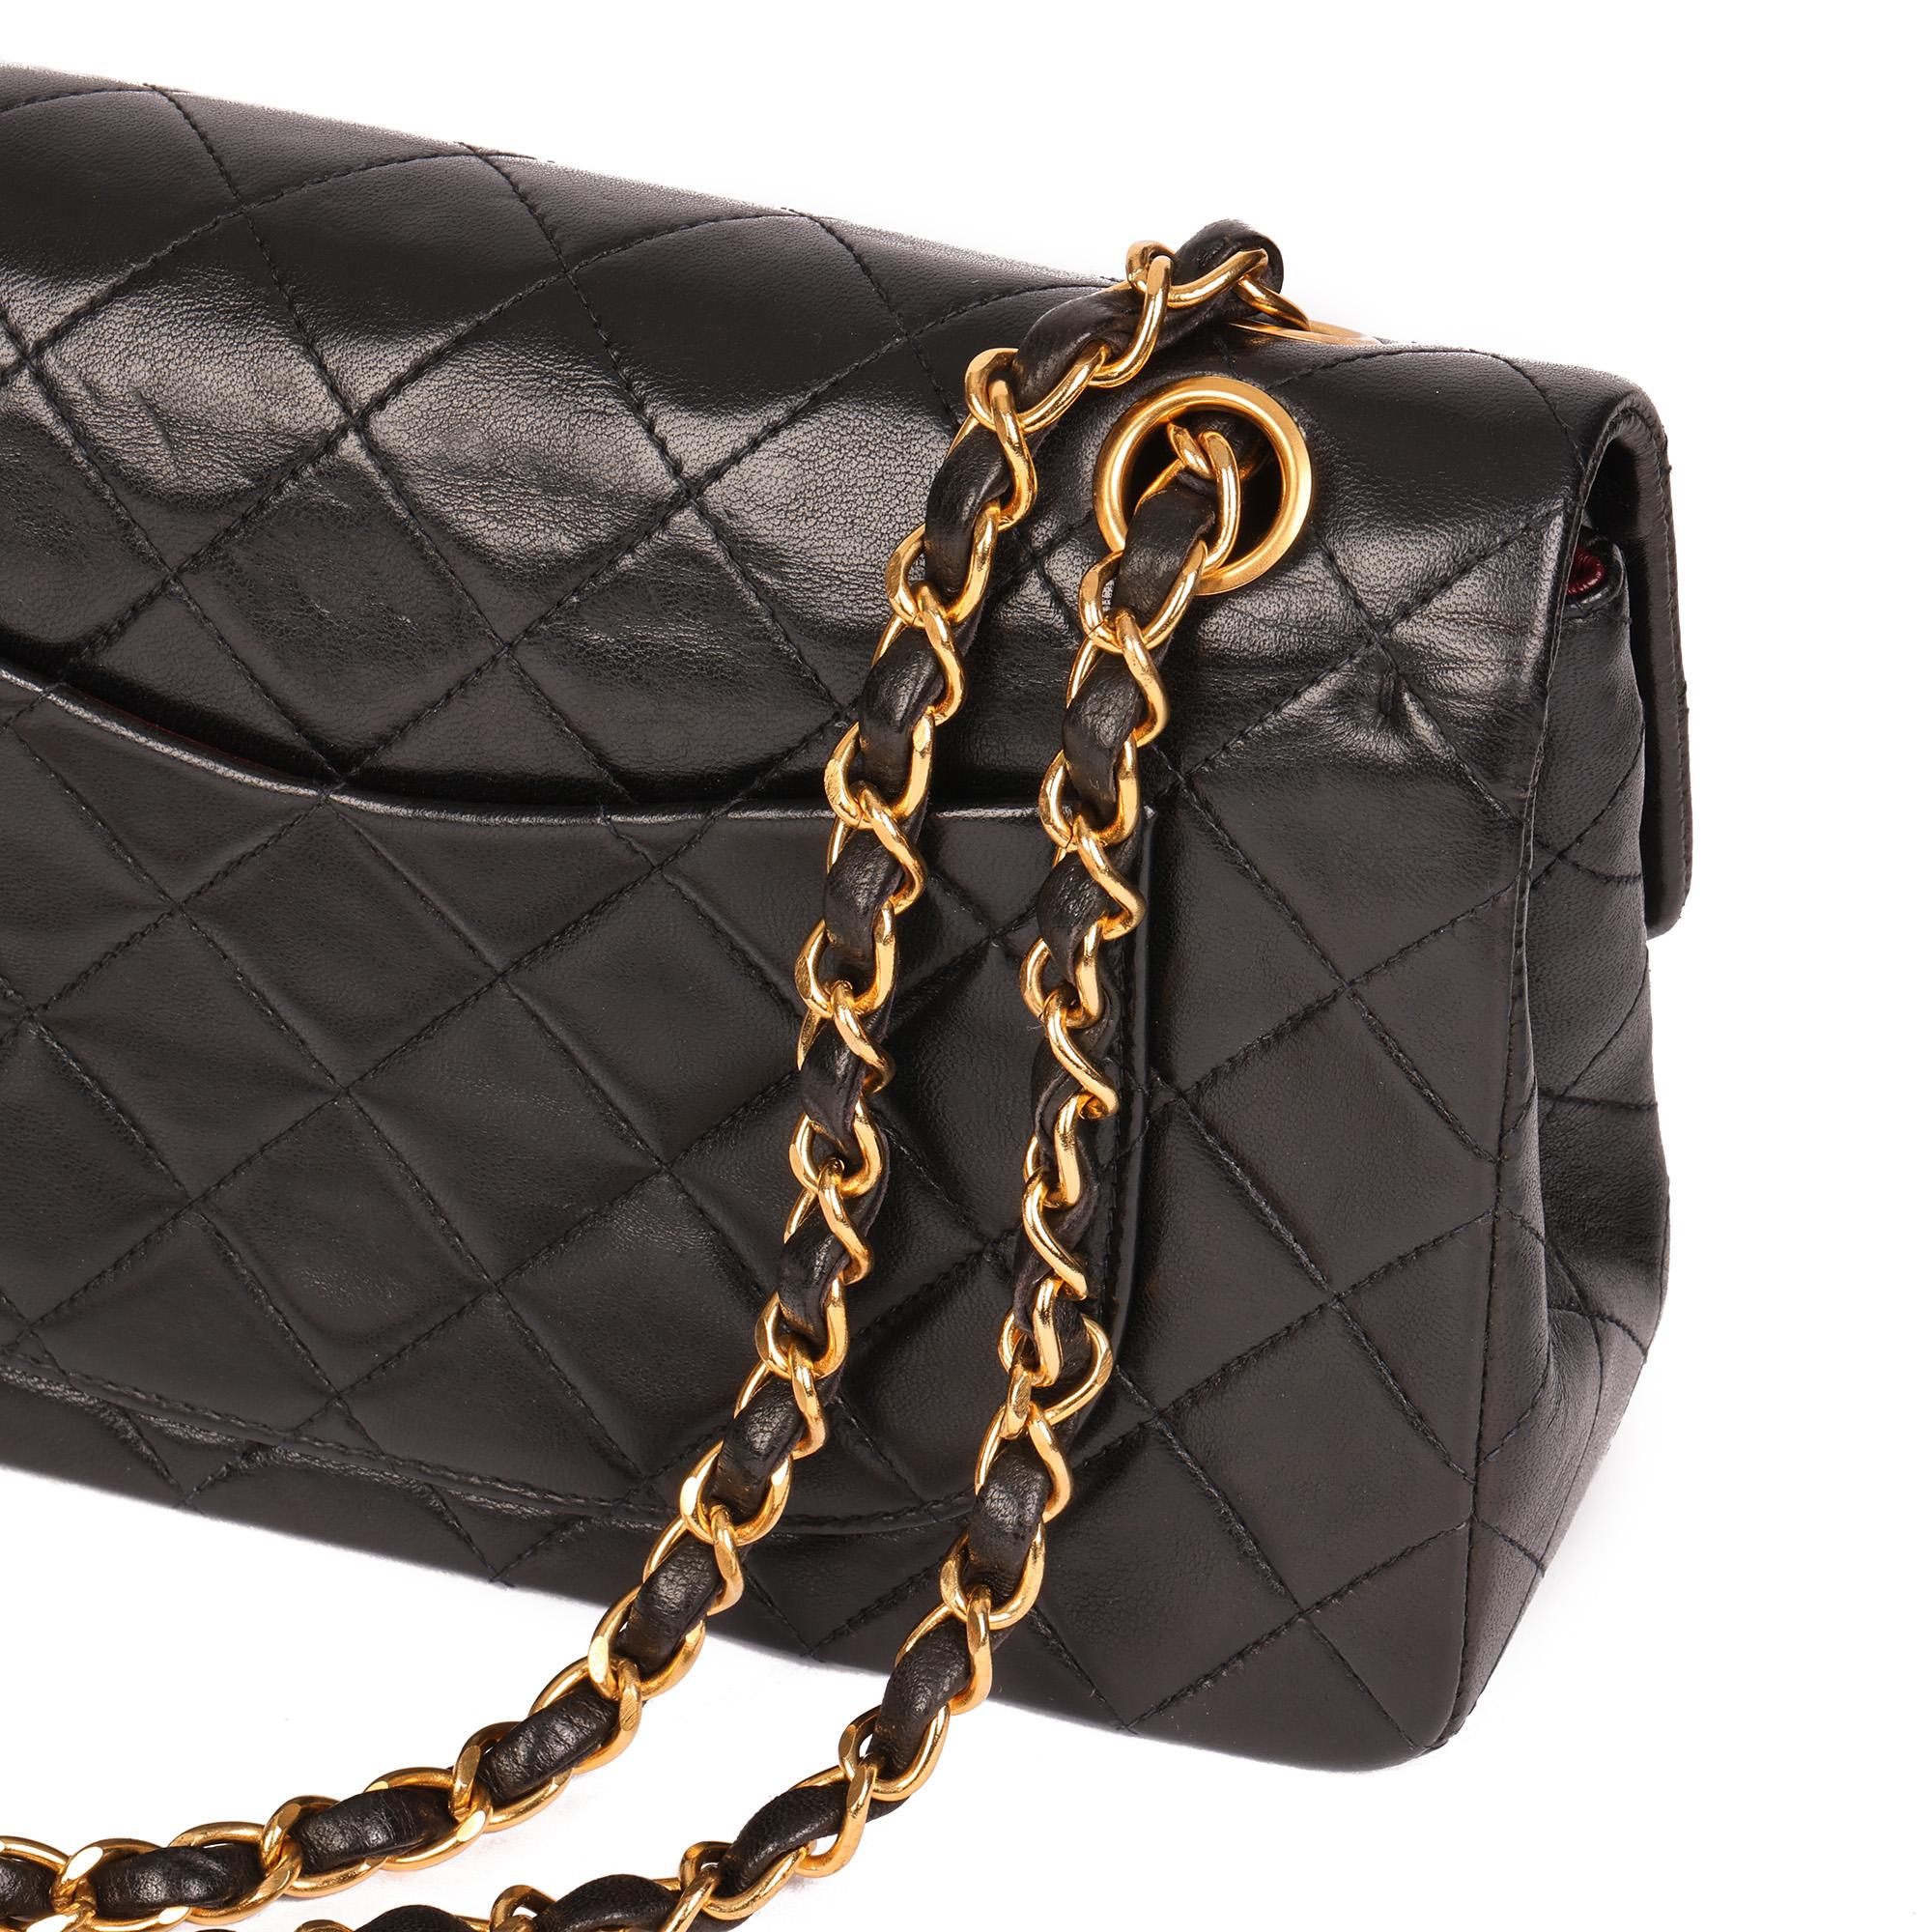 Chanel BLACK QUILTED LAMBSKIN VINTAGE SMALL CLASSIC DOUBLE FLAP BAG 2